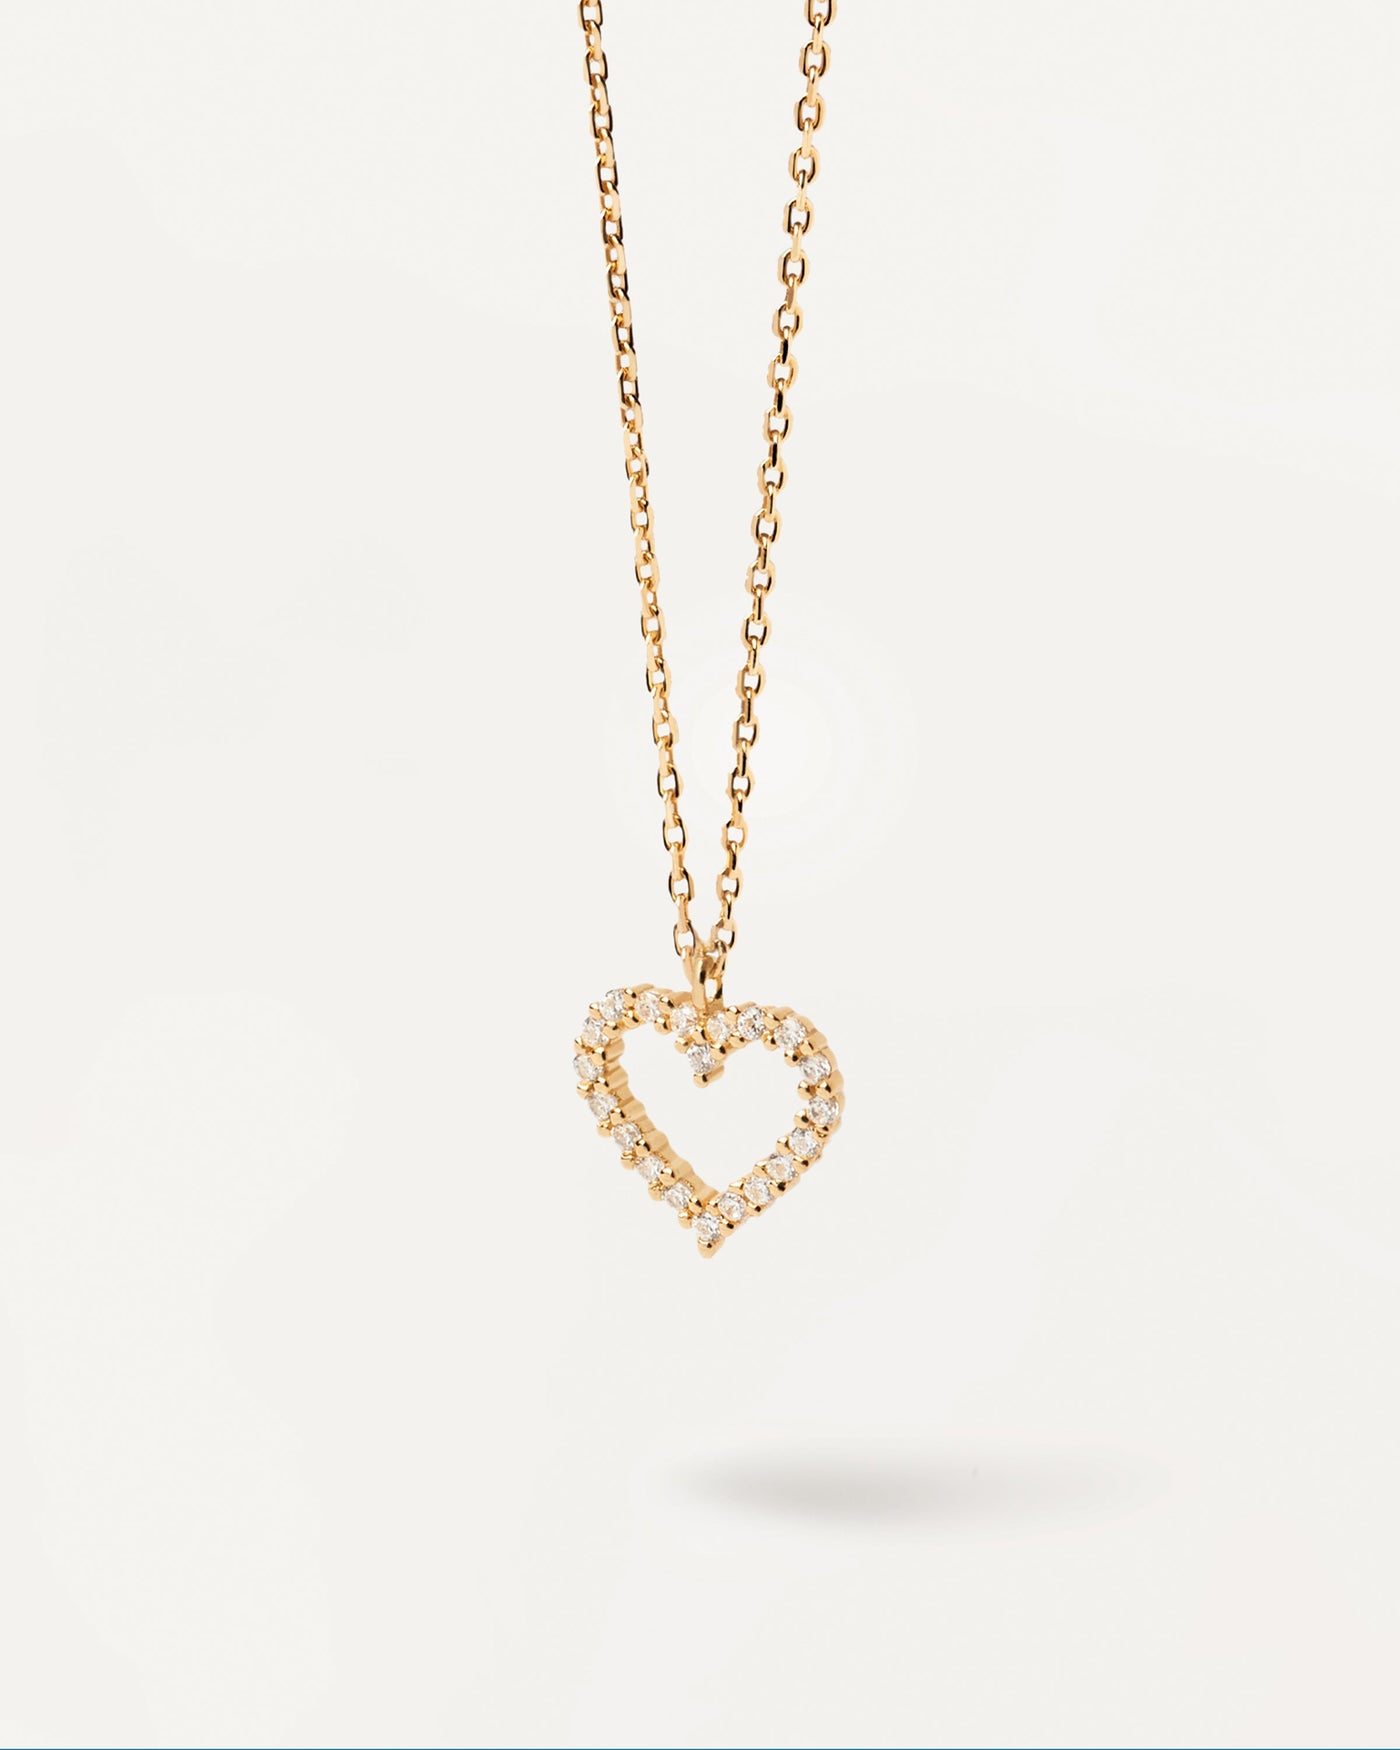 2023 Selection | White Heart Necklace. Heart pendant set with white zirconia stones on a 18k gold plated single link chain necklace. Get the latest arrival from PDPAOLA. Place your order safely and get this Best Seller. Free Shipping.